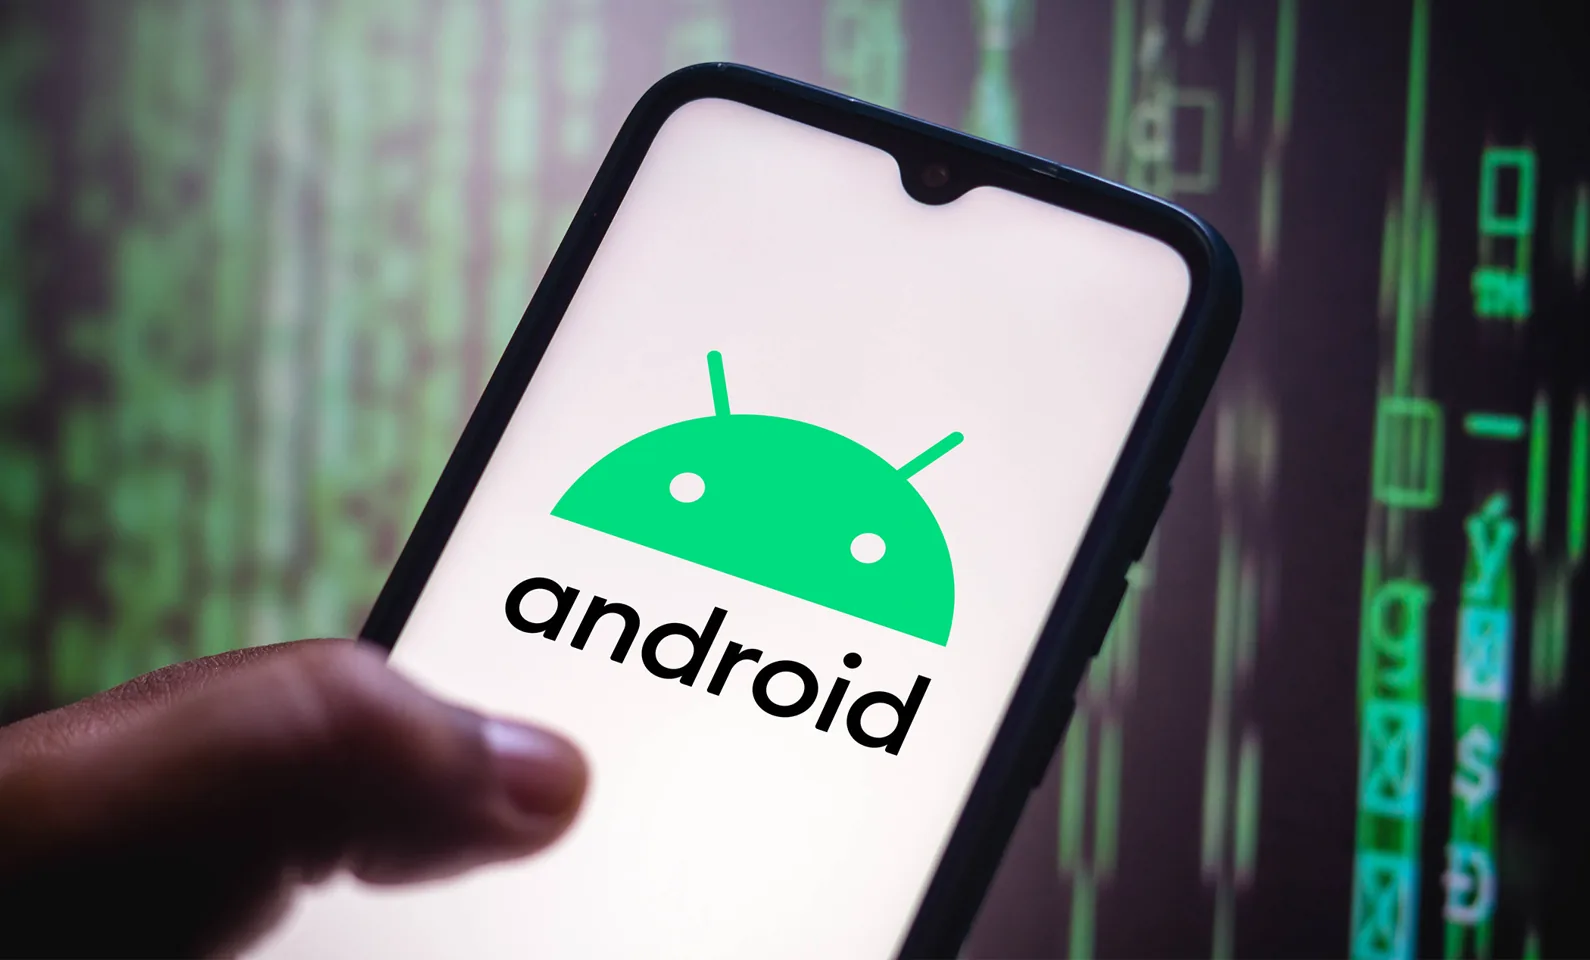 Android 13: What To Expect From The 2022 Version Of The OS